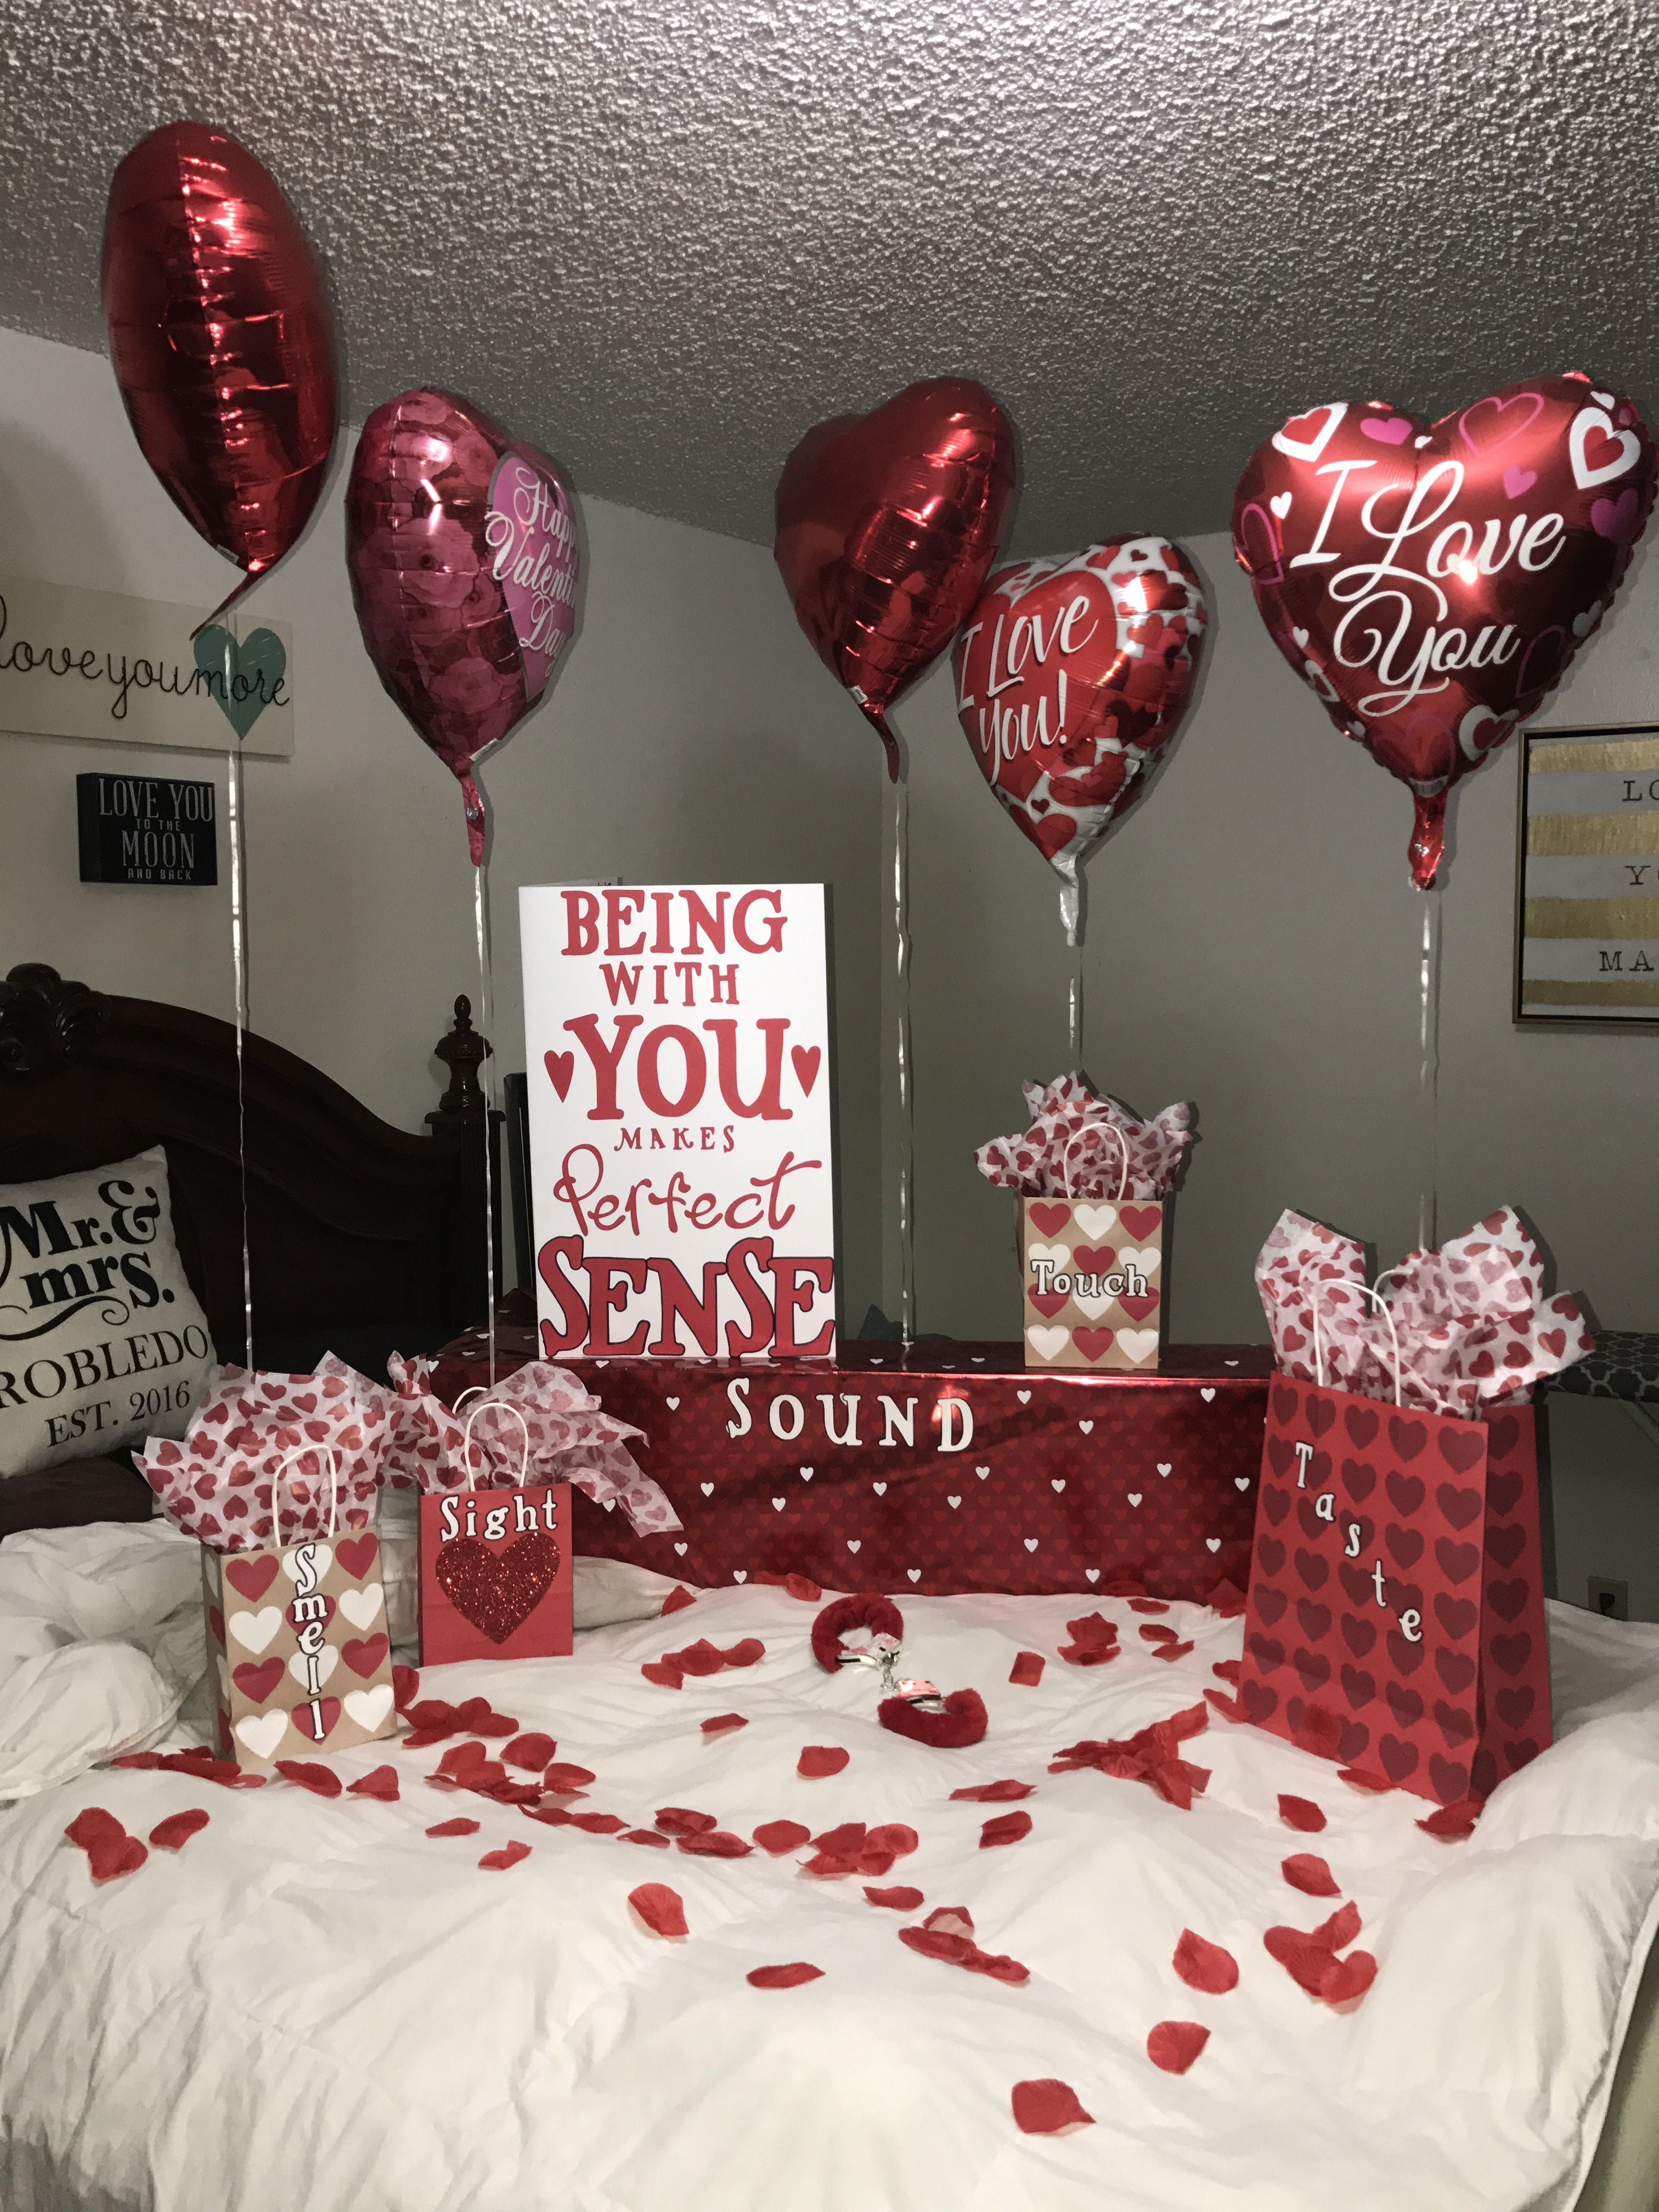 10 Wonderful Unique Ideas For Valentines Day For Him valentines day surprise for him 5 senses anniversarygifts 2022